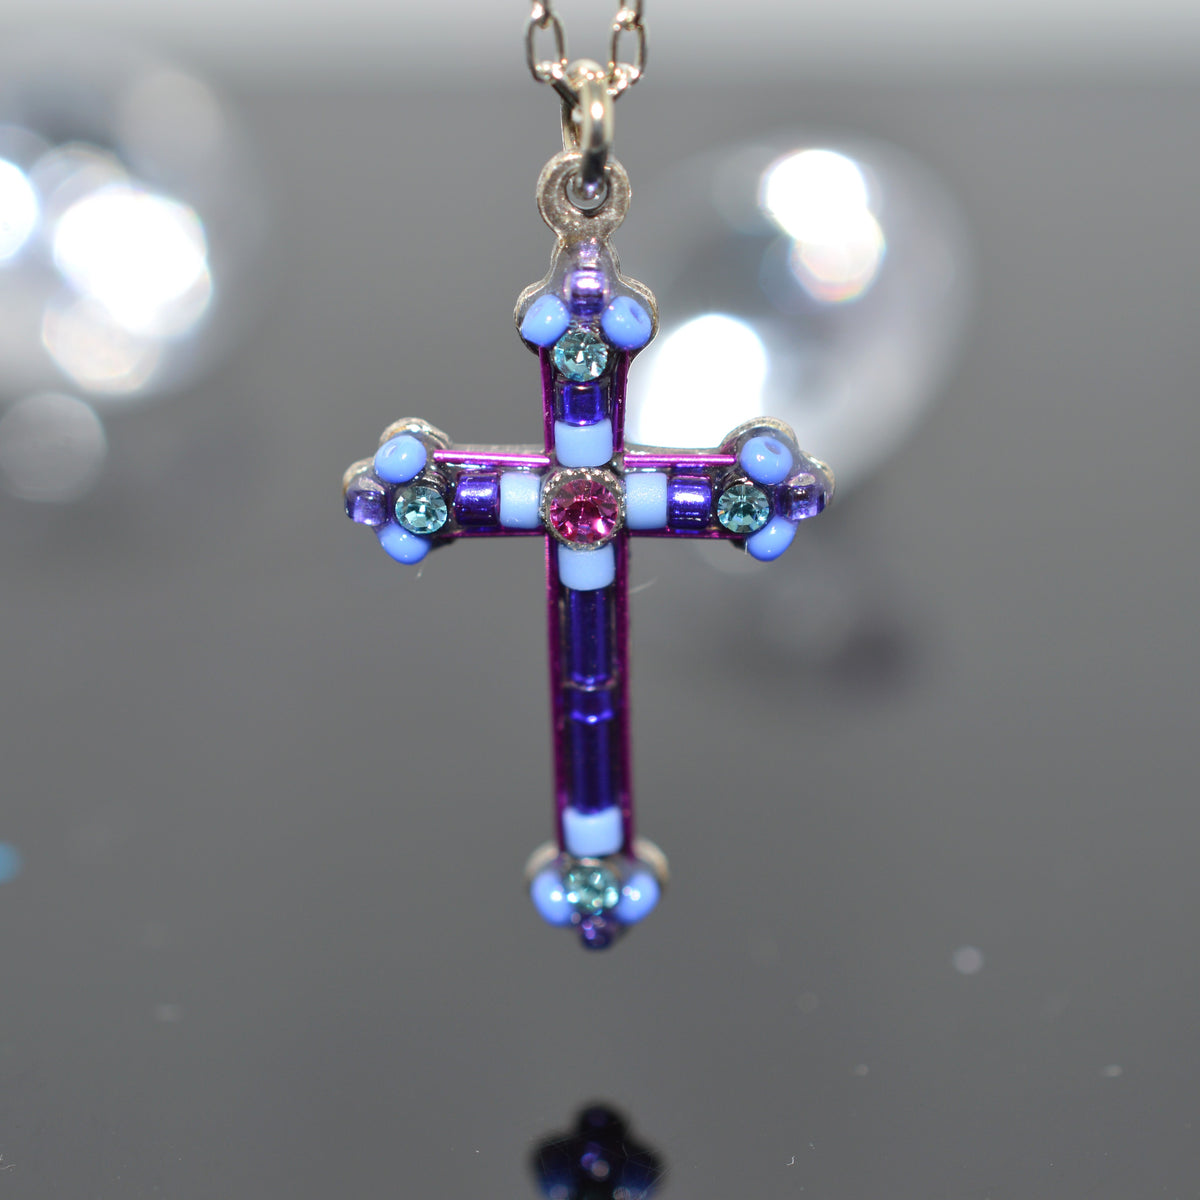 Antique Silver Plated Purple Crystal Cross Pendant by Firefly